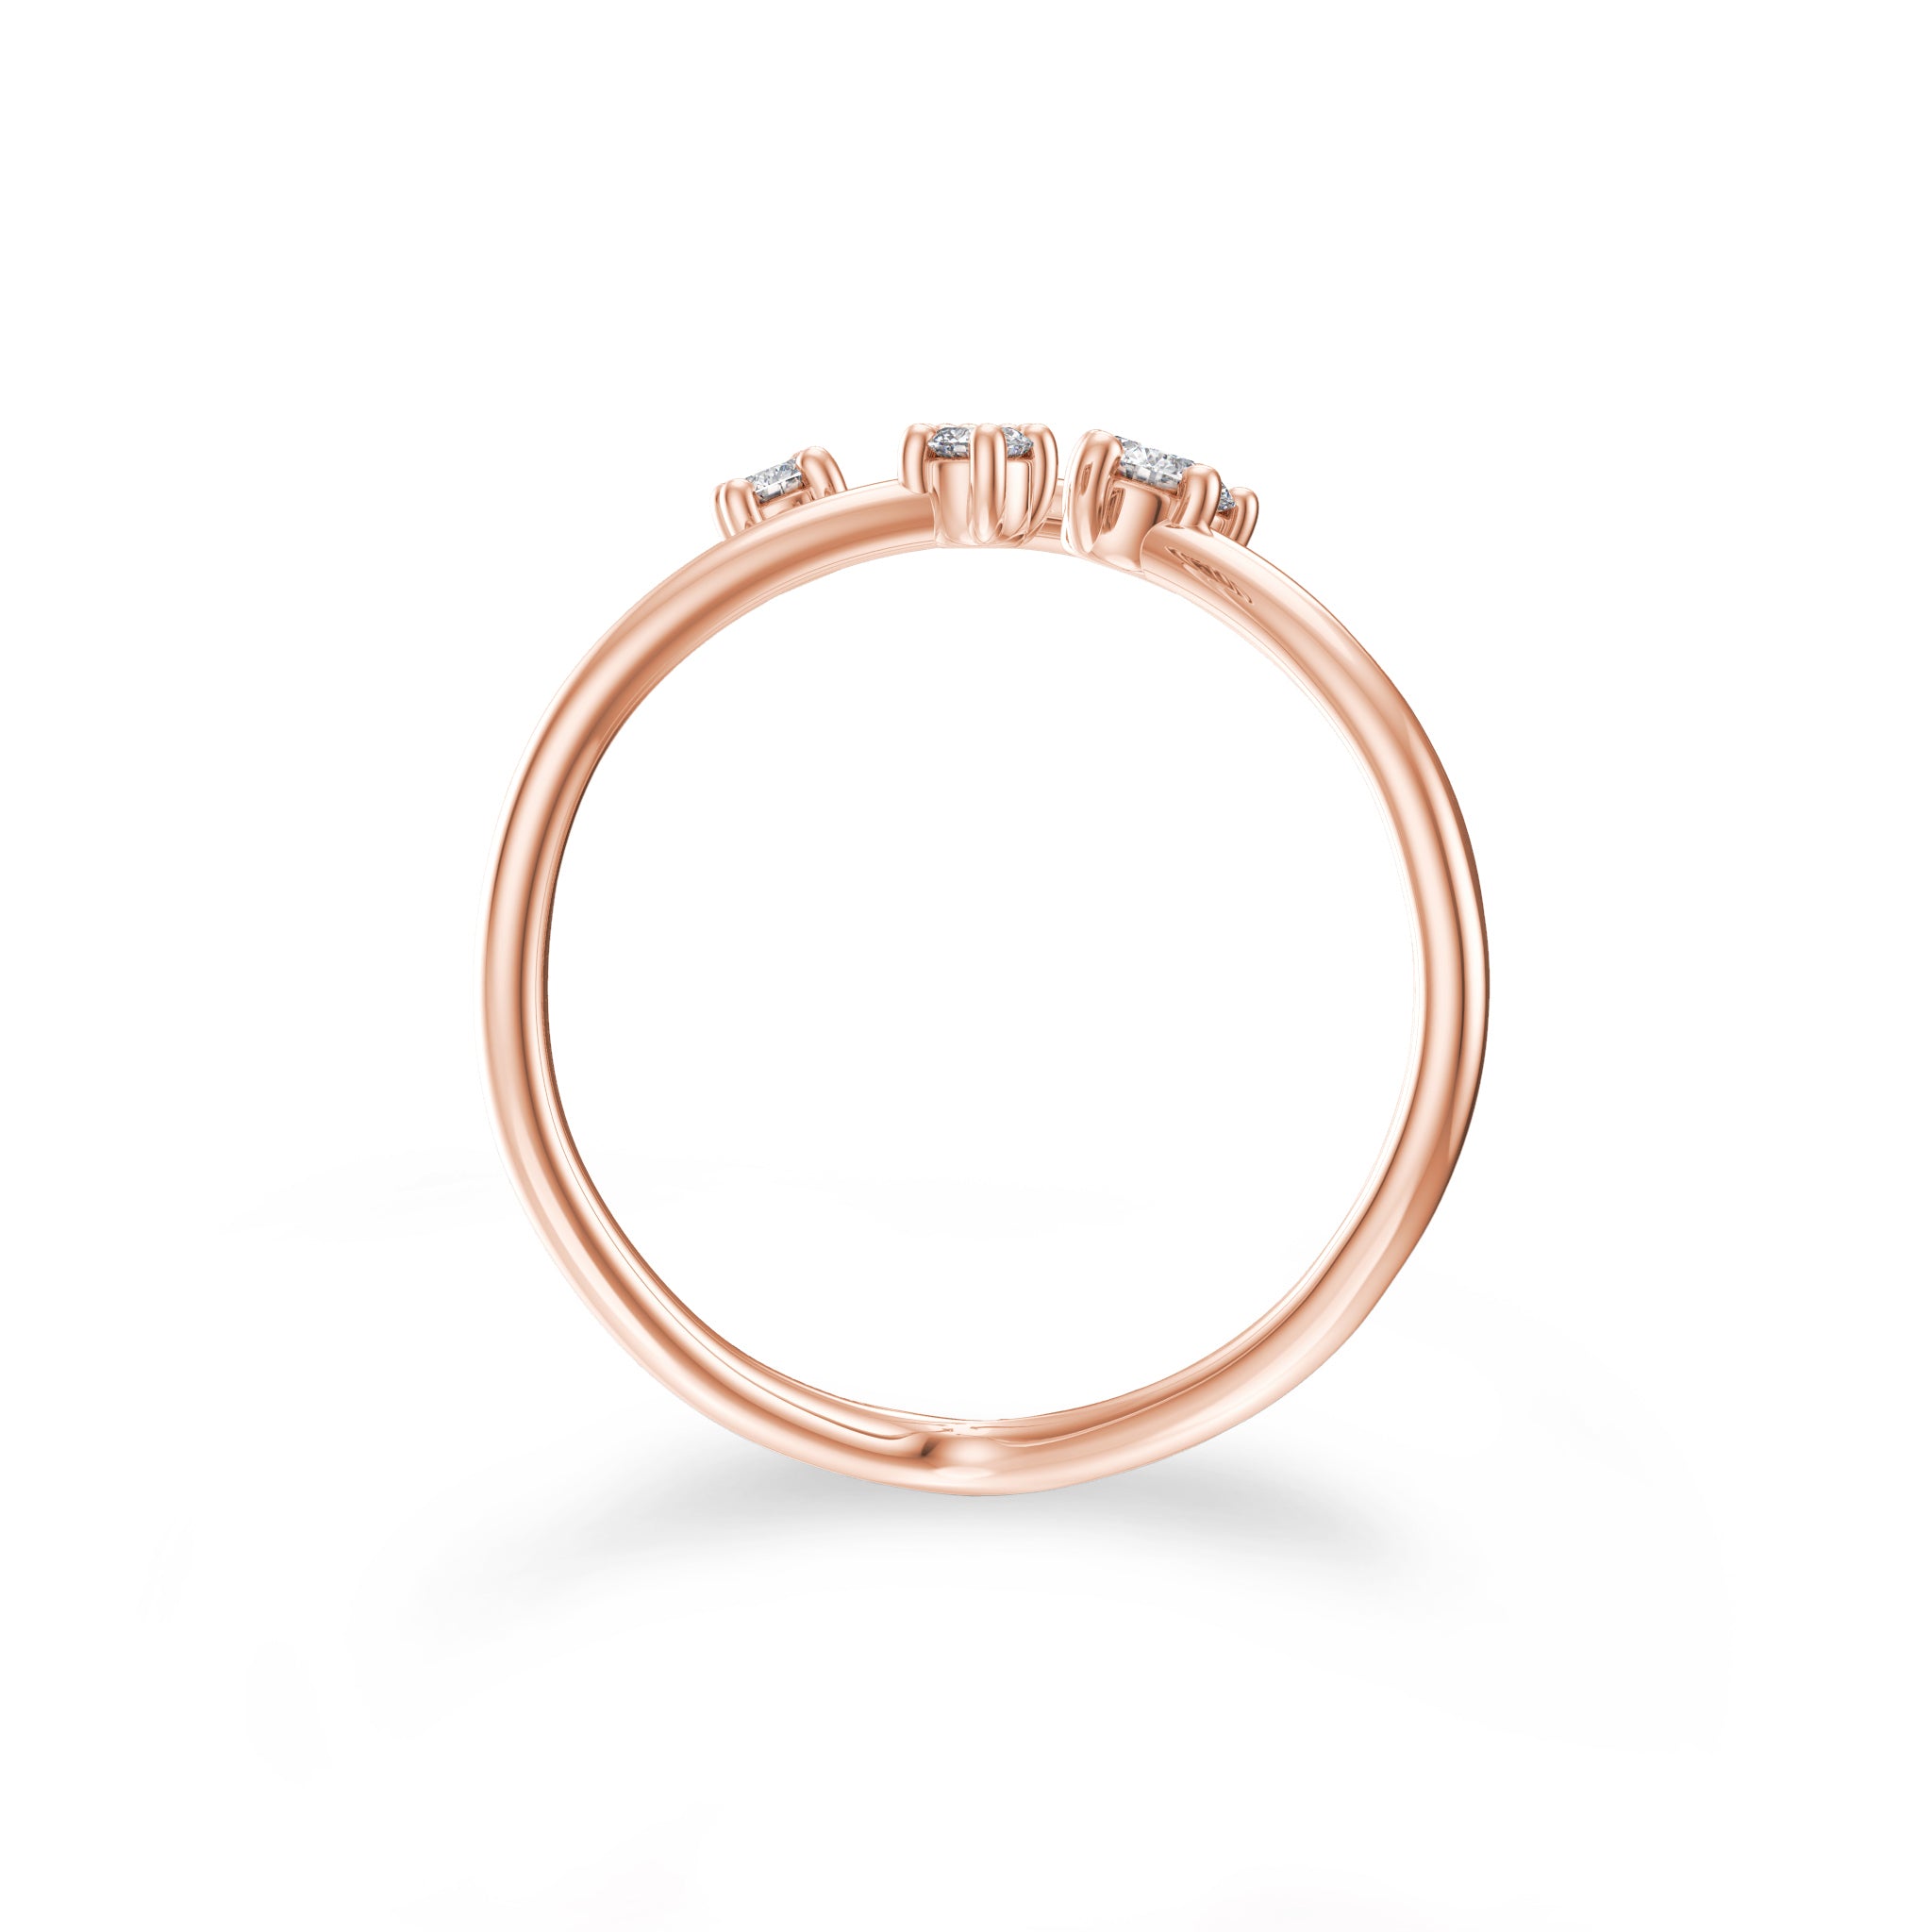 Shimansky - Southern Cross Small Diamond Ring Crafted in 14K Rose Gold